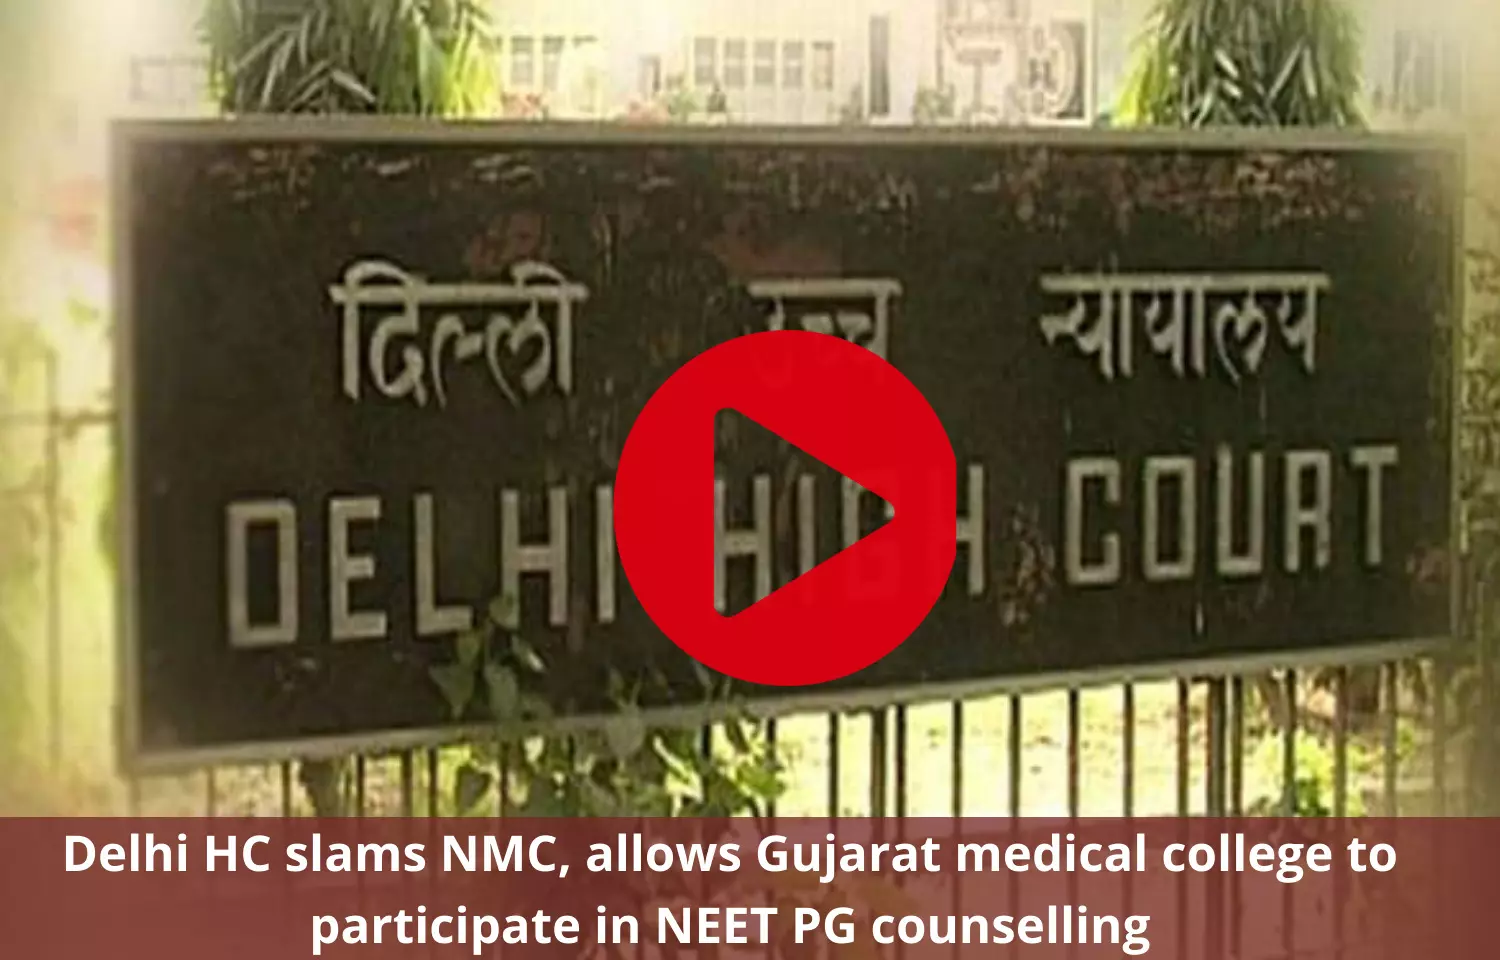 Delhi HC relief to Gujarat Medical college, allows admissions for 11 PG courses